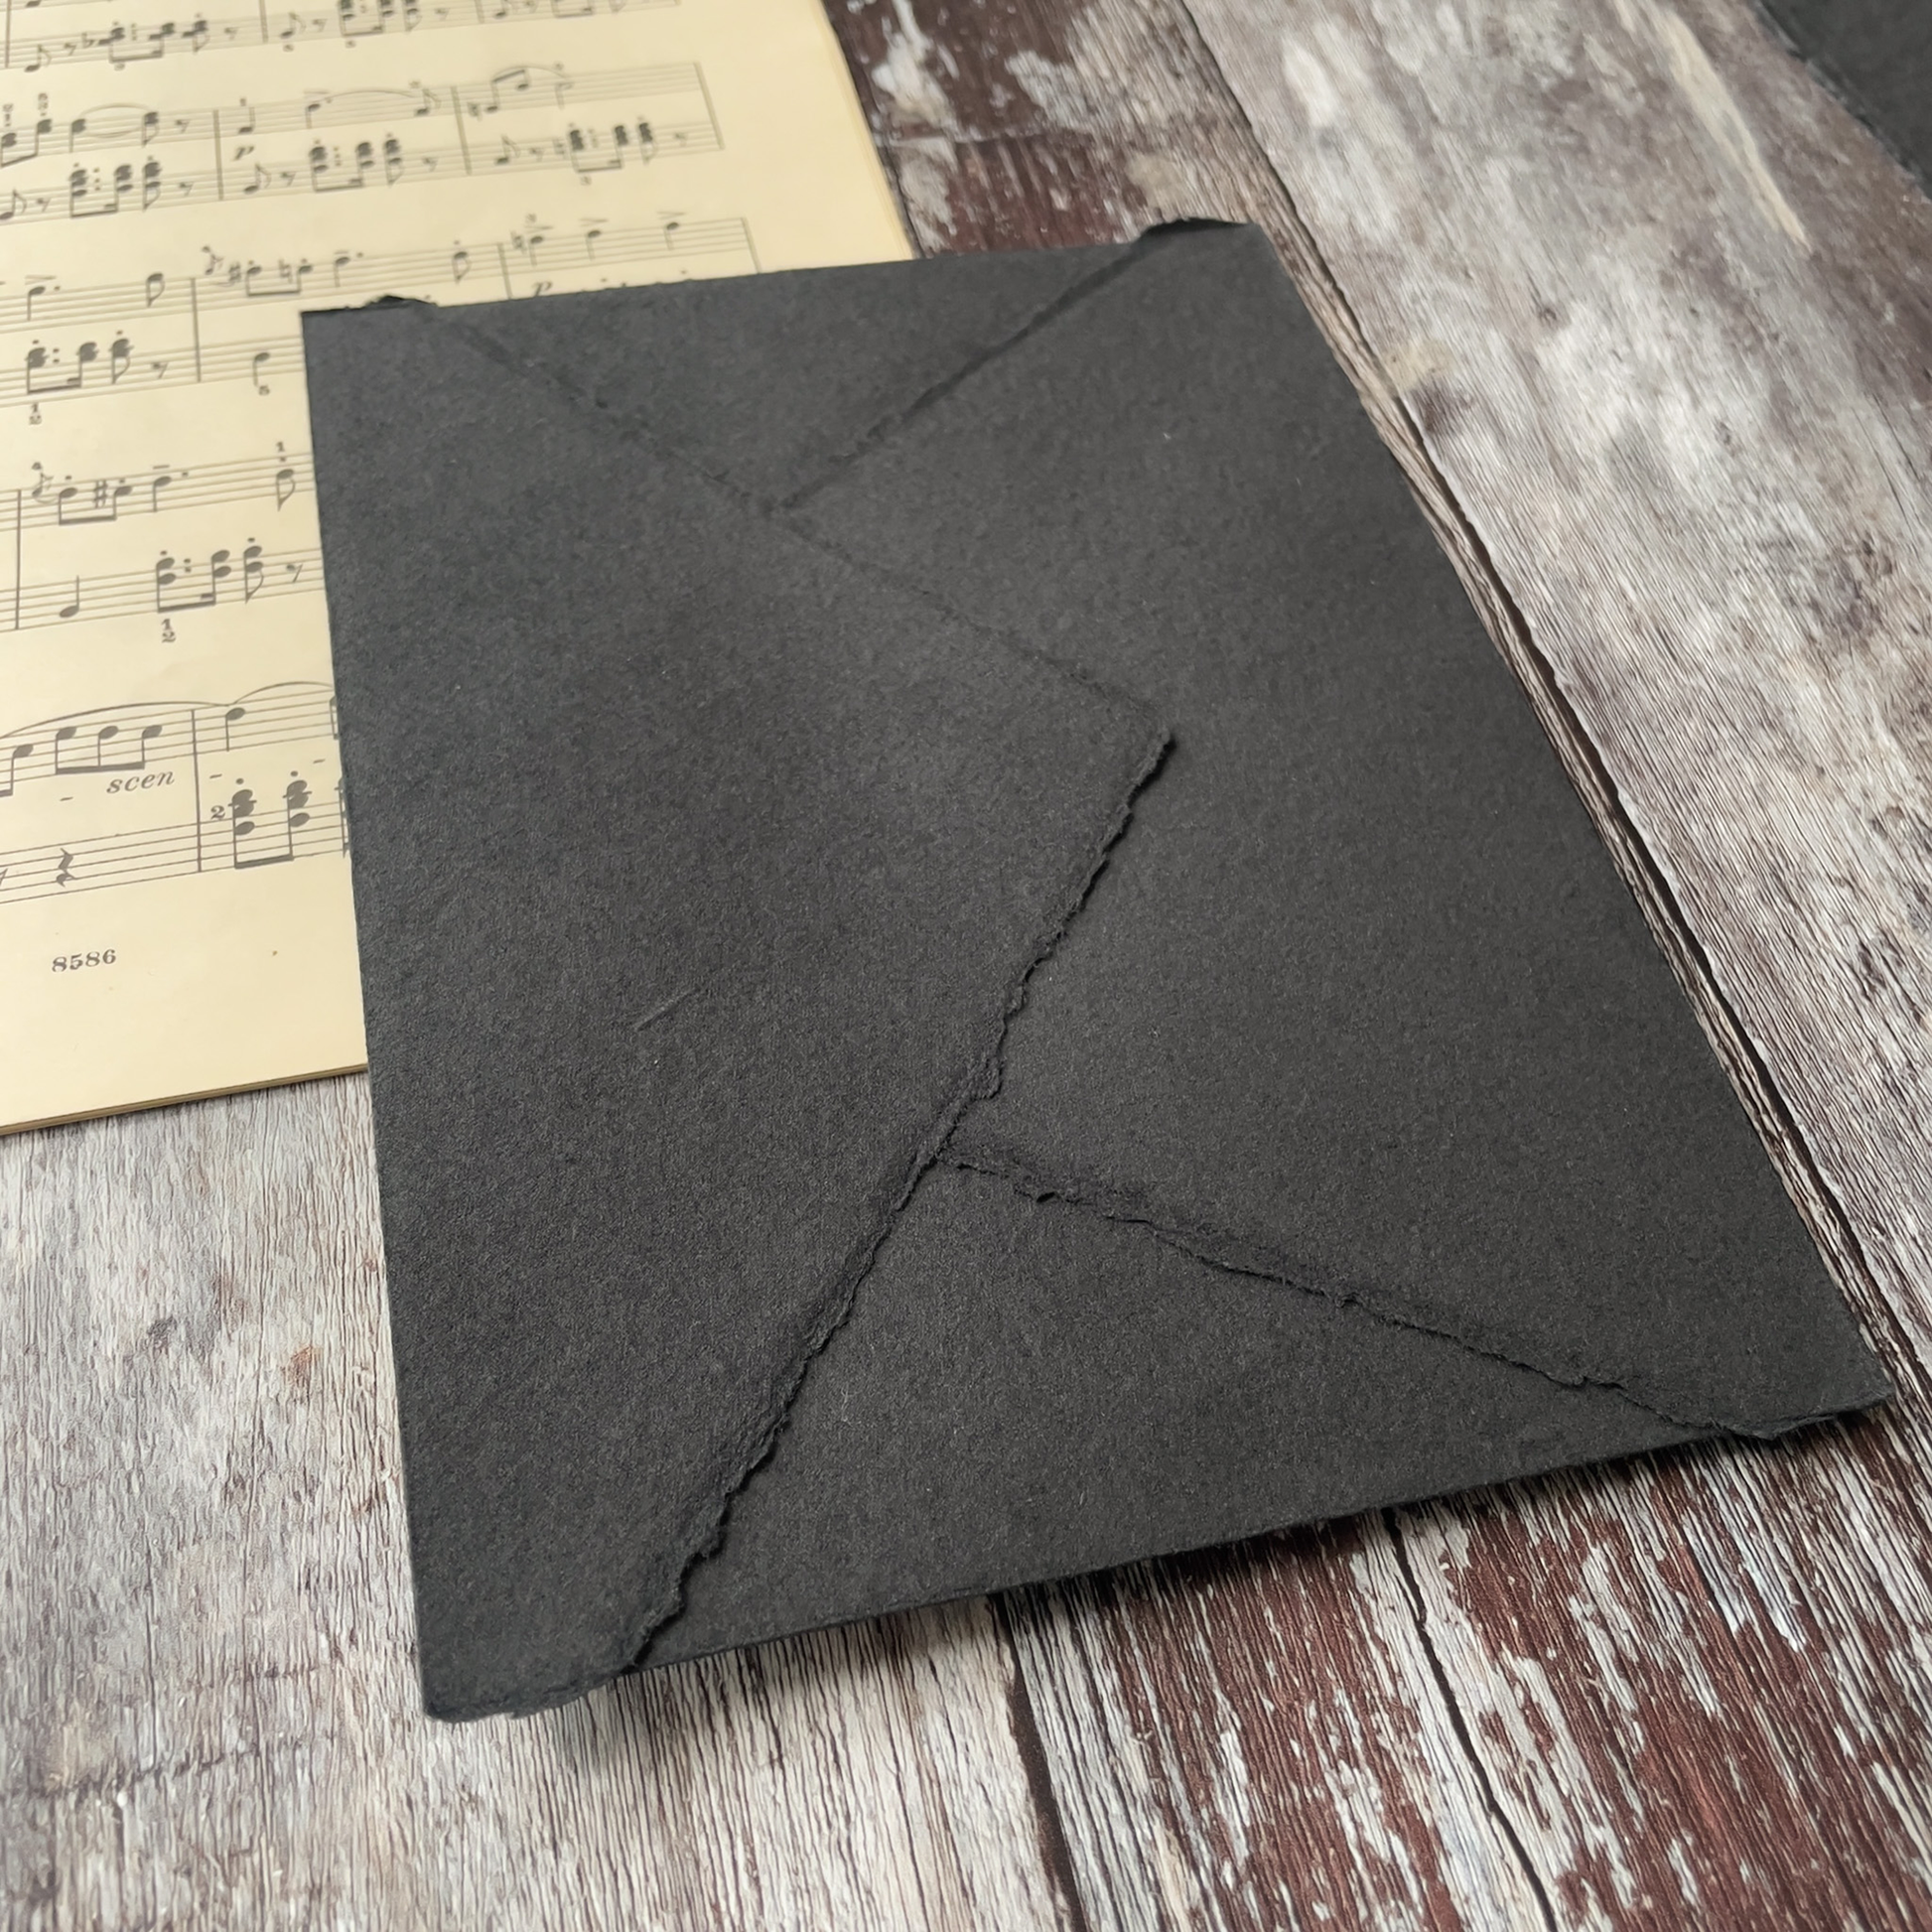 Black Handmade Paper Envelope Envelopes By The Natural paper Company.  Envelopes made from recycled handmade paper with a deckled edge.  